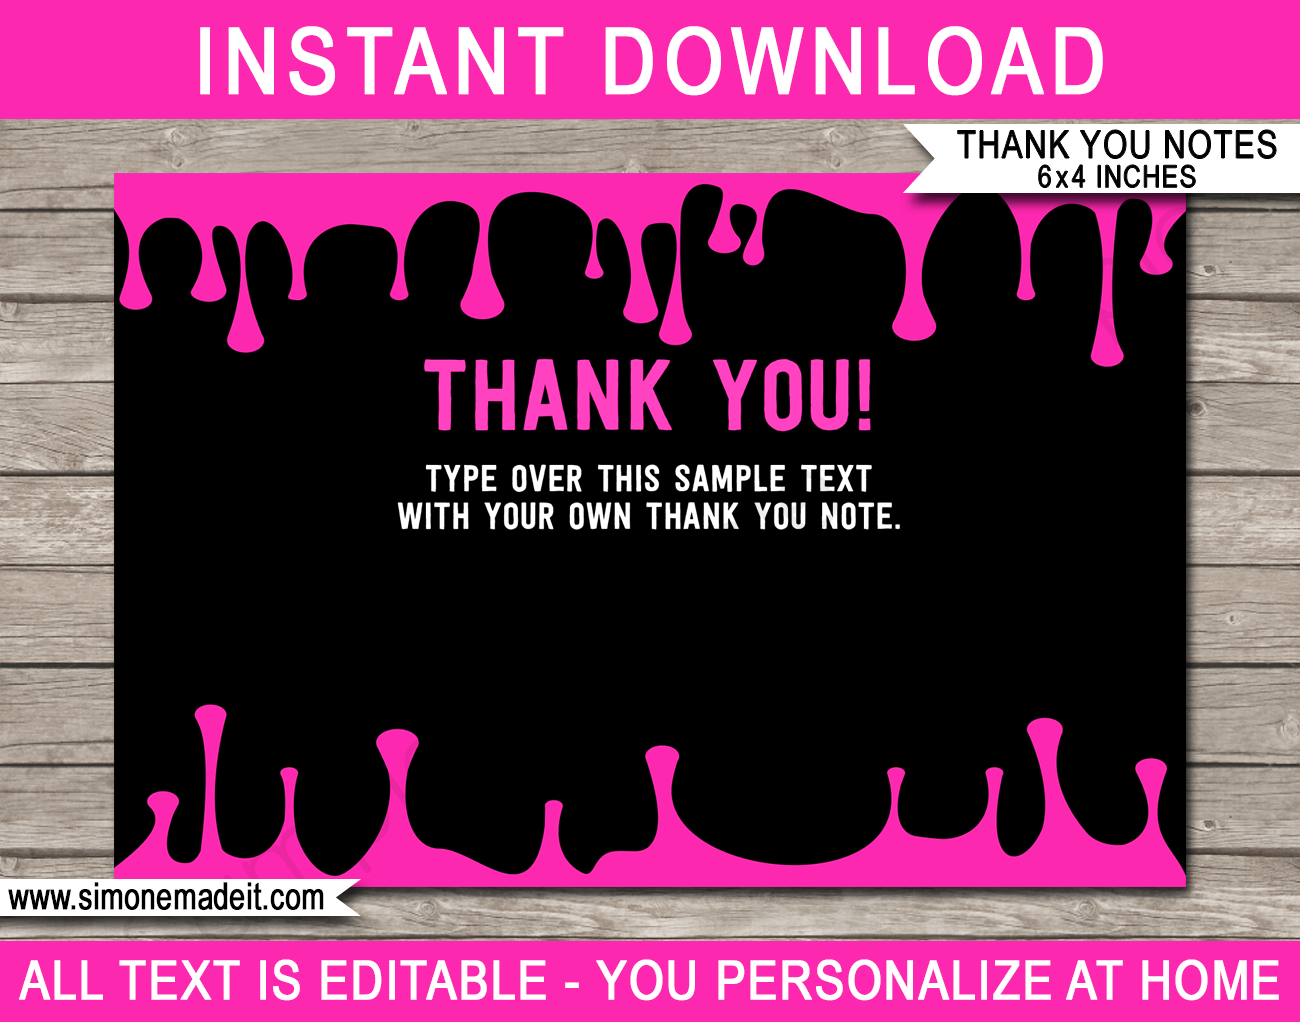 Printable Slime Birthday Party Thank You Note Cards - Favor Tags - Slime Theme Party - Editable Template - Instant Download via simonemadeit.com